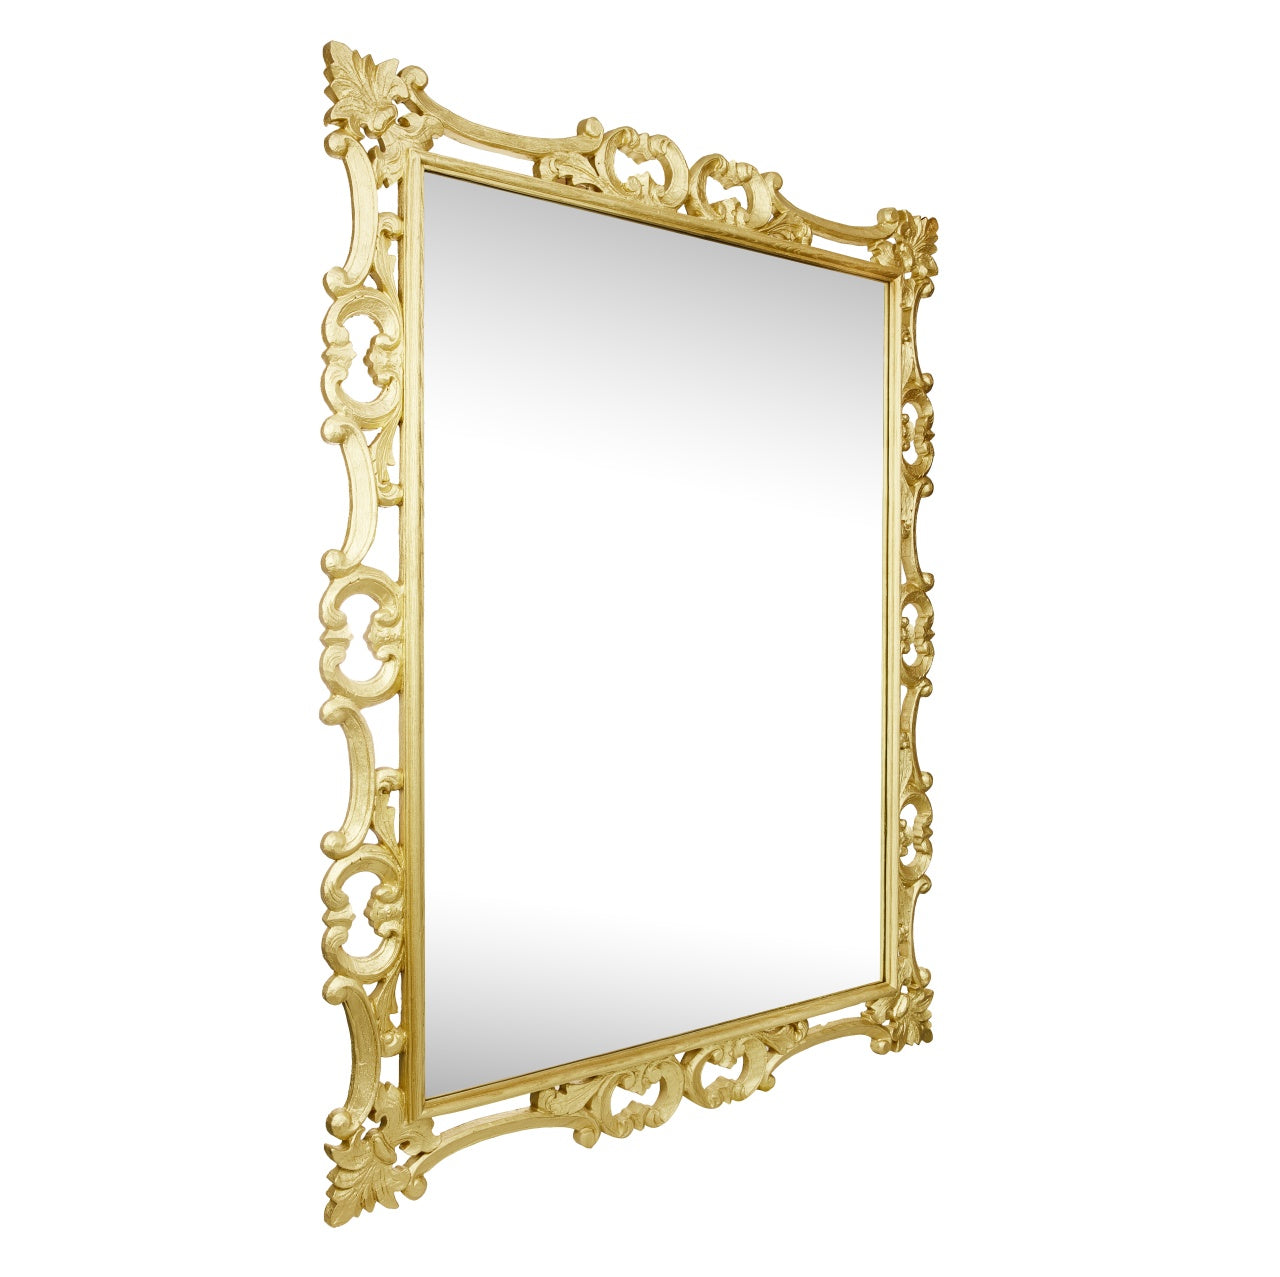 Izzi Large Gold - Paramount Mirrors and Prints